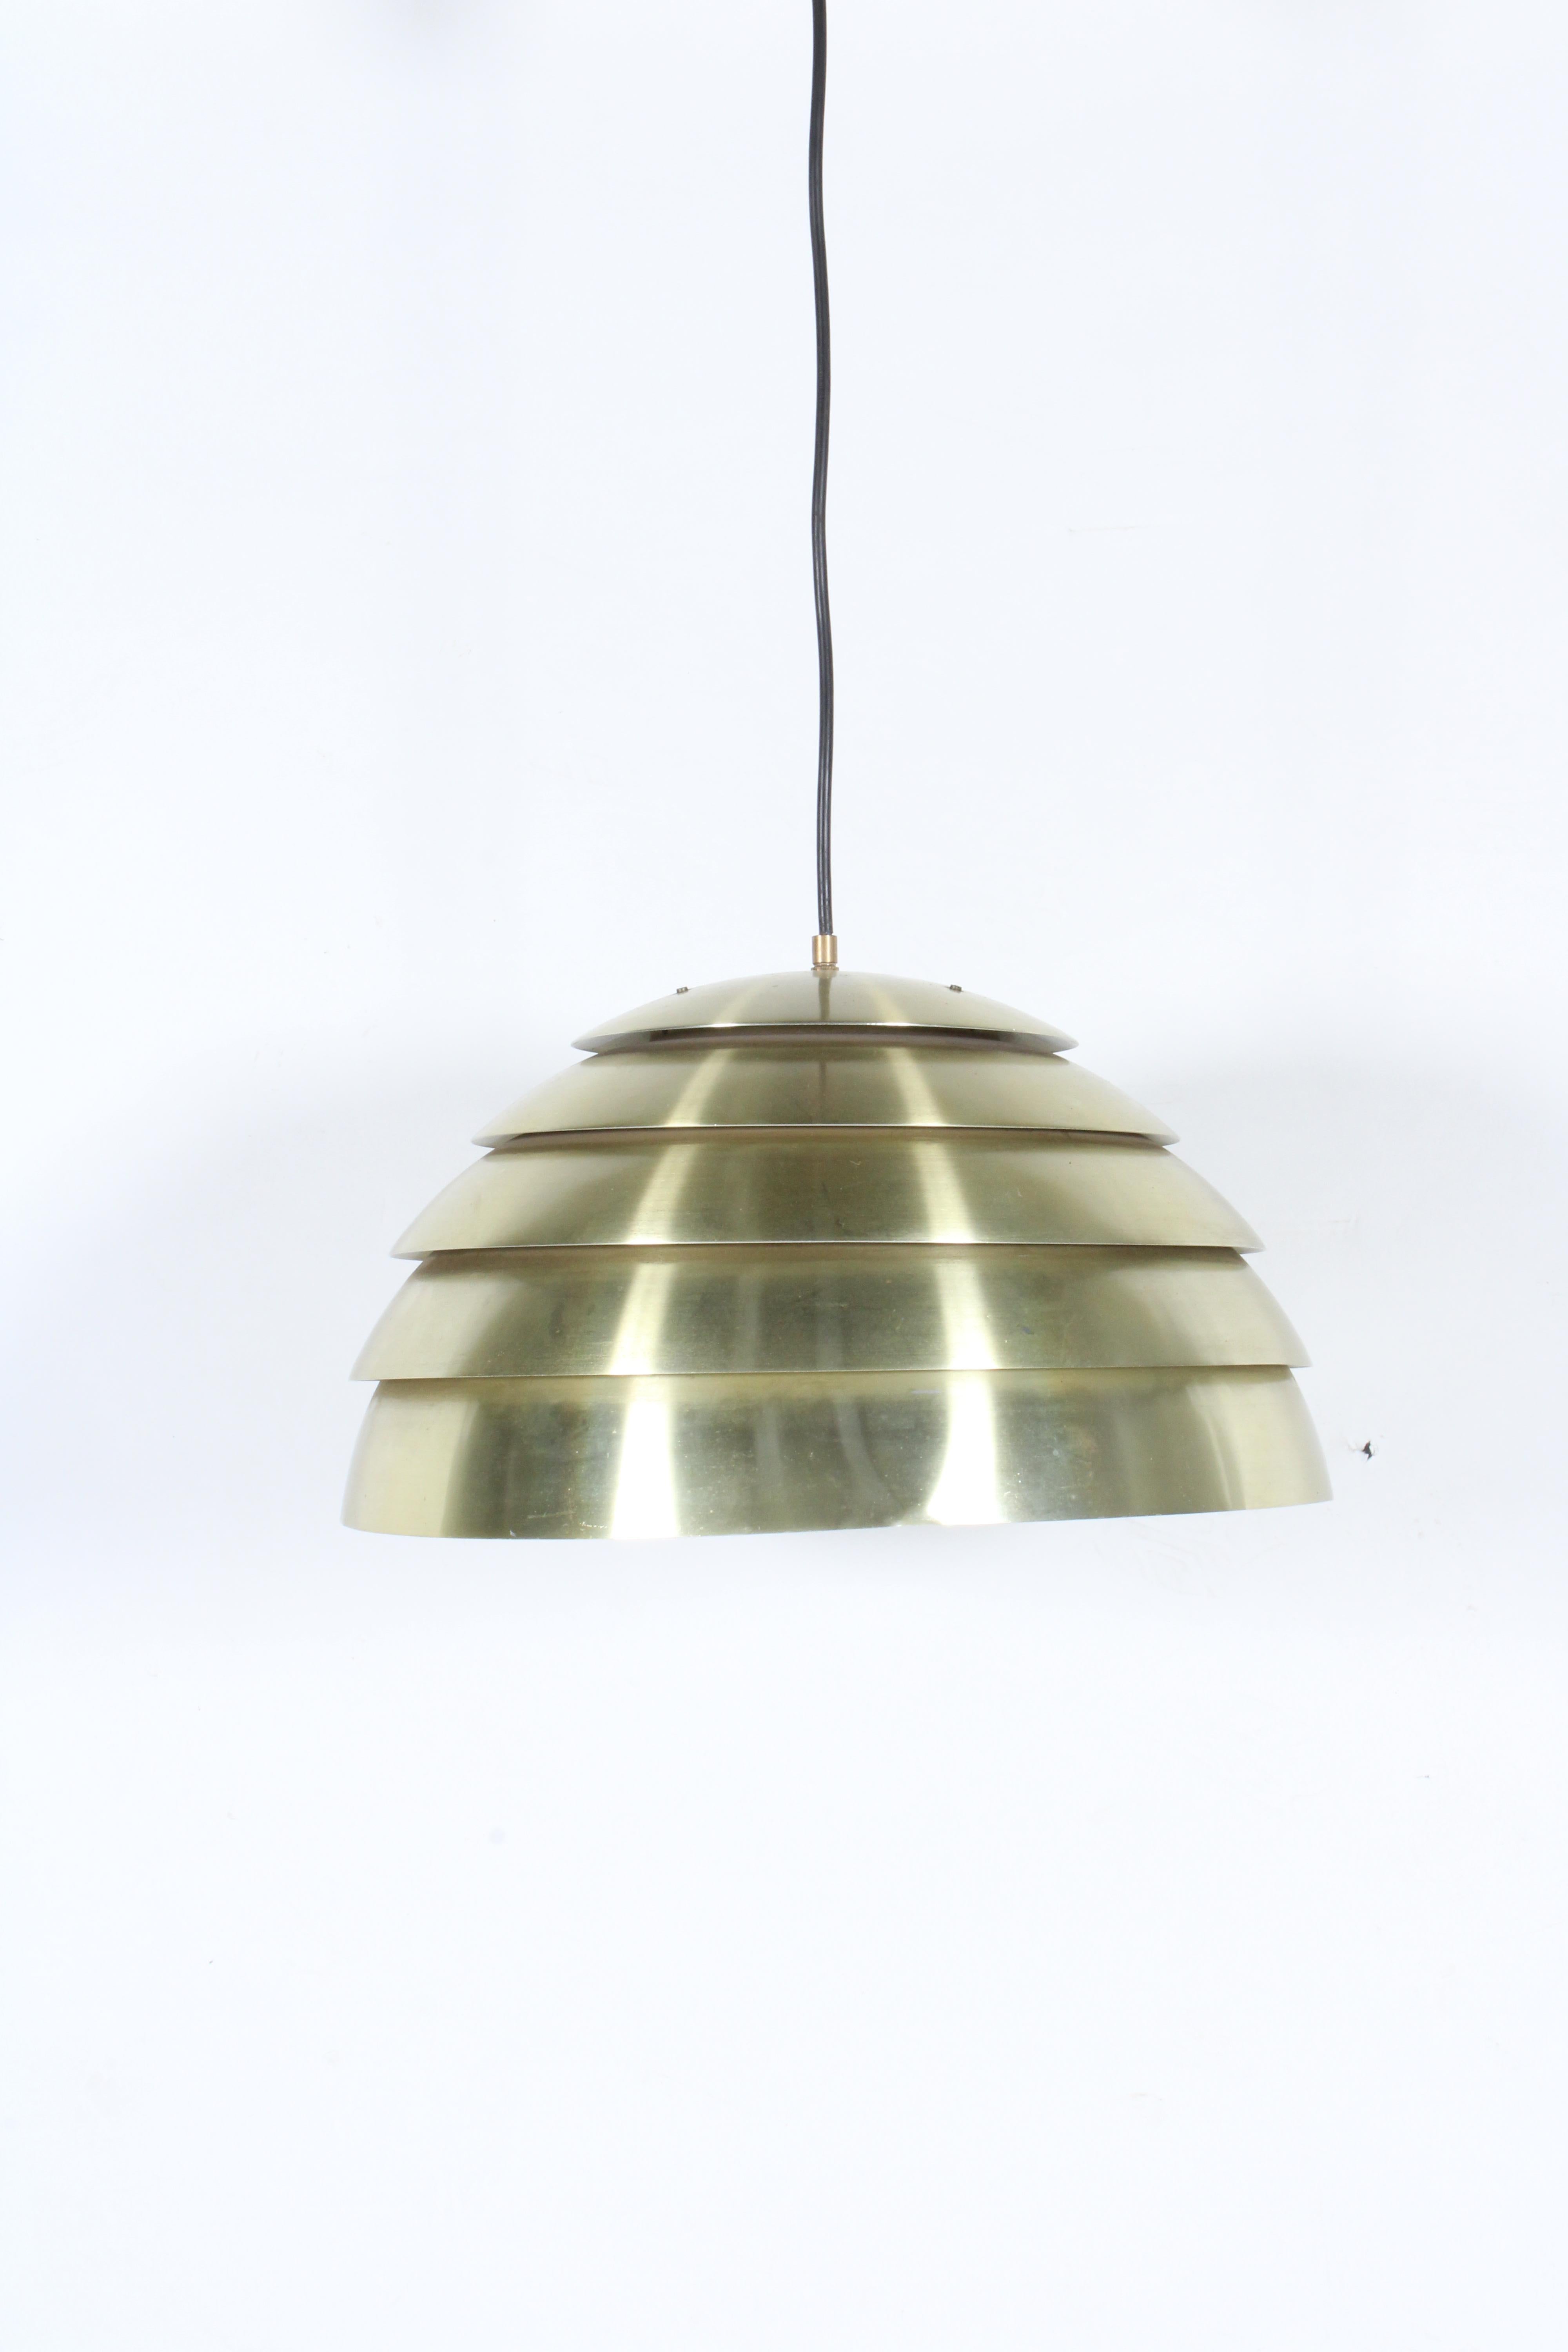 A stunning vintage brass pendant by the iconic Swedish designer Hans Agne Jakobsson. Bearing the original makers label to the interior, this piece is in excellent vintage condition and when illuminated produces a beautiful ambient light. Please see